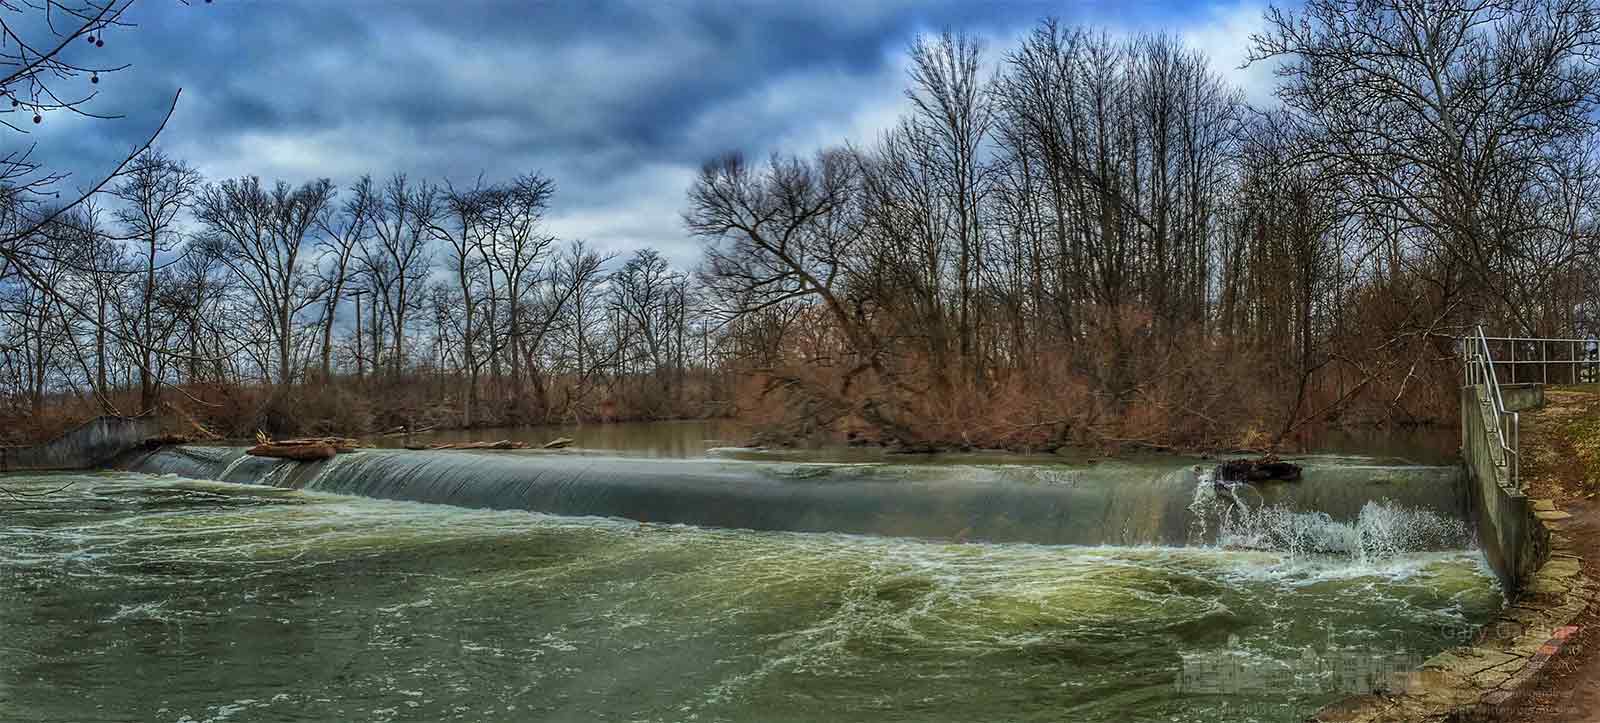 Water rushes over the spillway at Alum Creek North after another day of rain filled the creek as runoff from already soaked fields. My Final Photo for February 29, 2016.